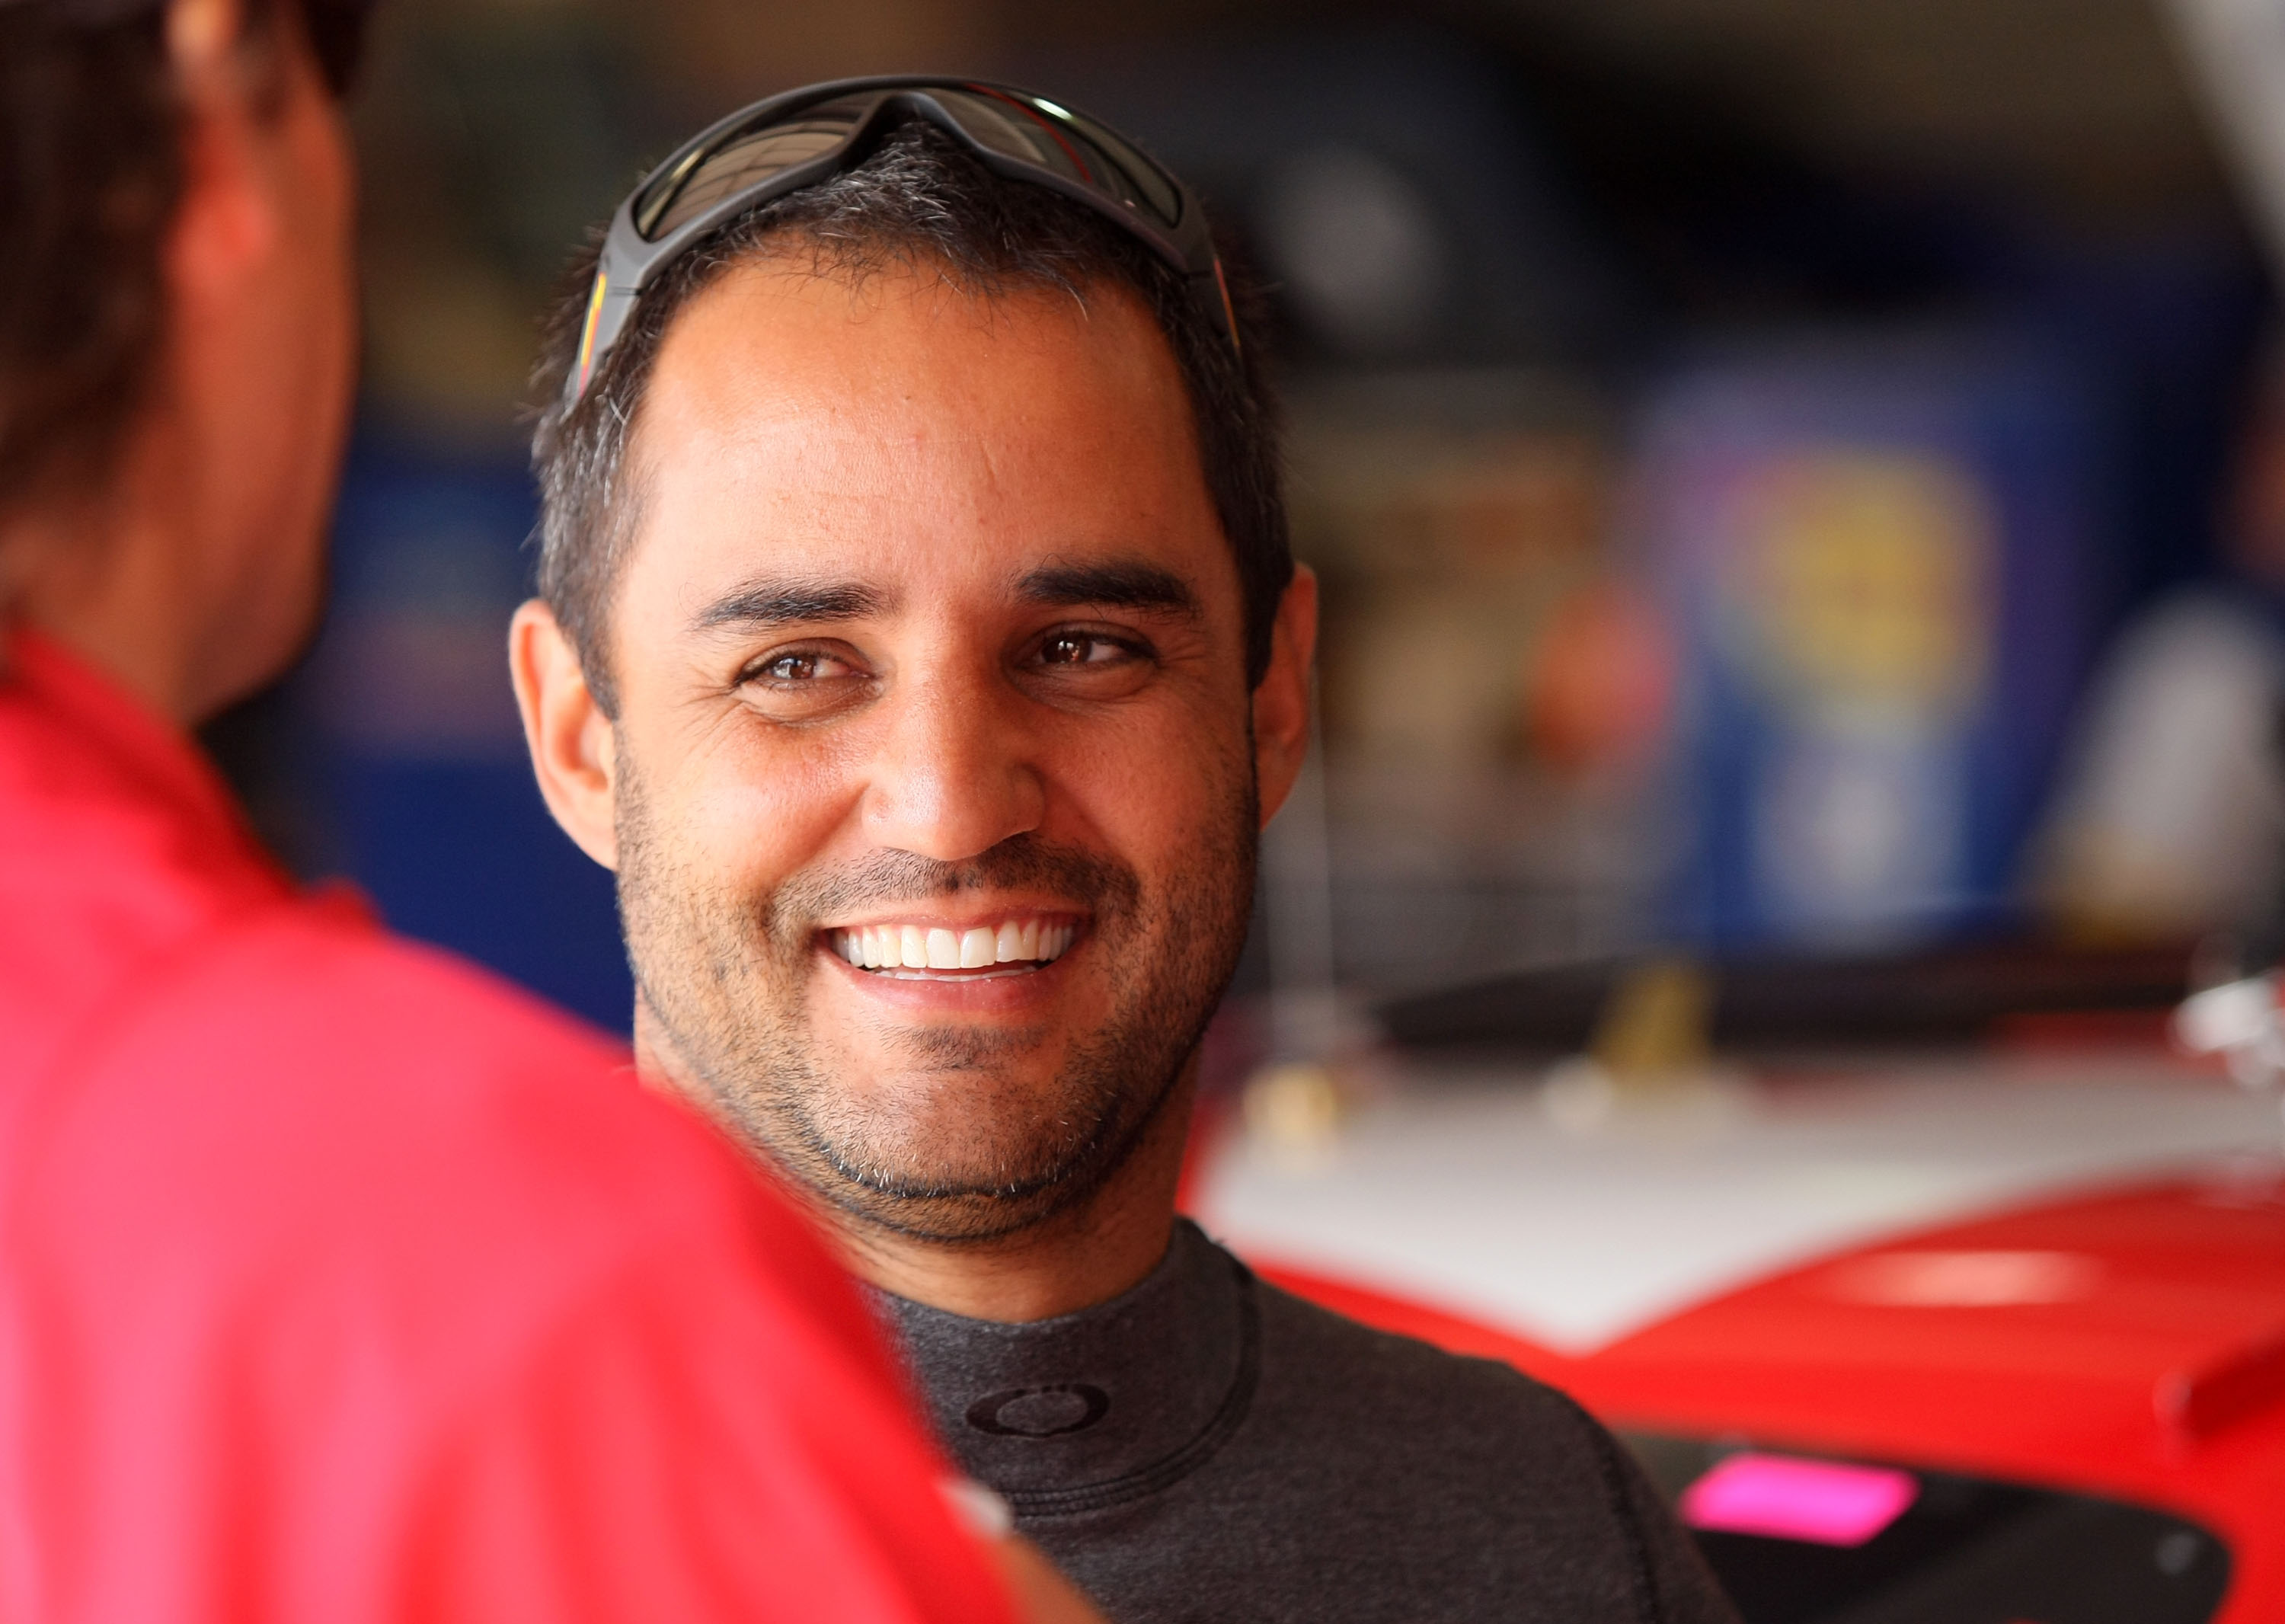 FONTANA, CA - MARCH 26:  Juan Pablo Montoya, driver of the #42 Target Chevrolet, stands in the garage area during practice for the NASCAR Sprint Cup Series Auto Club 400 at Auto Club Speedway on March 26, 2011 in Fontana, California.  (Photo by Victor Dec